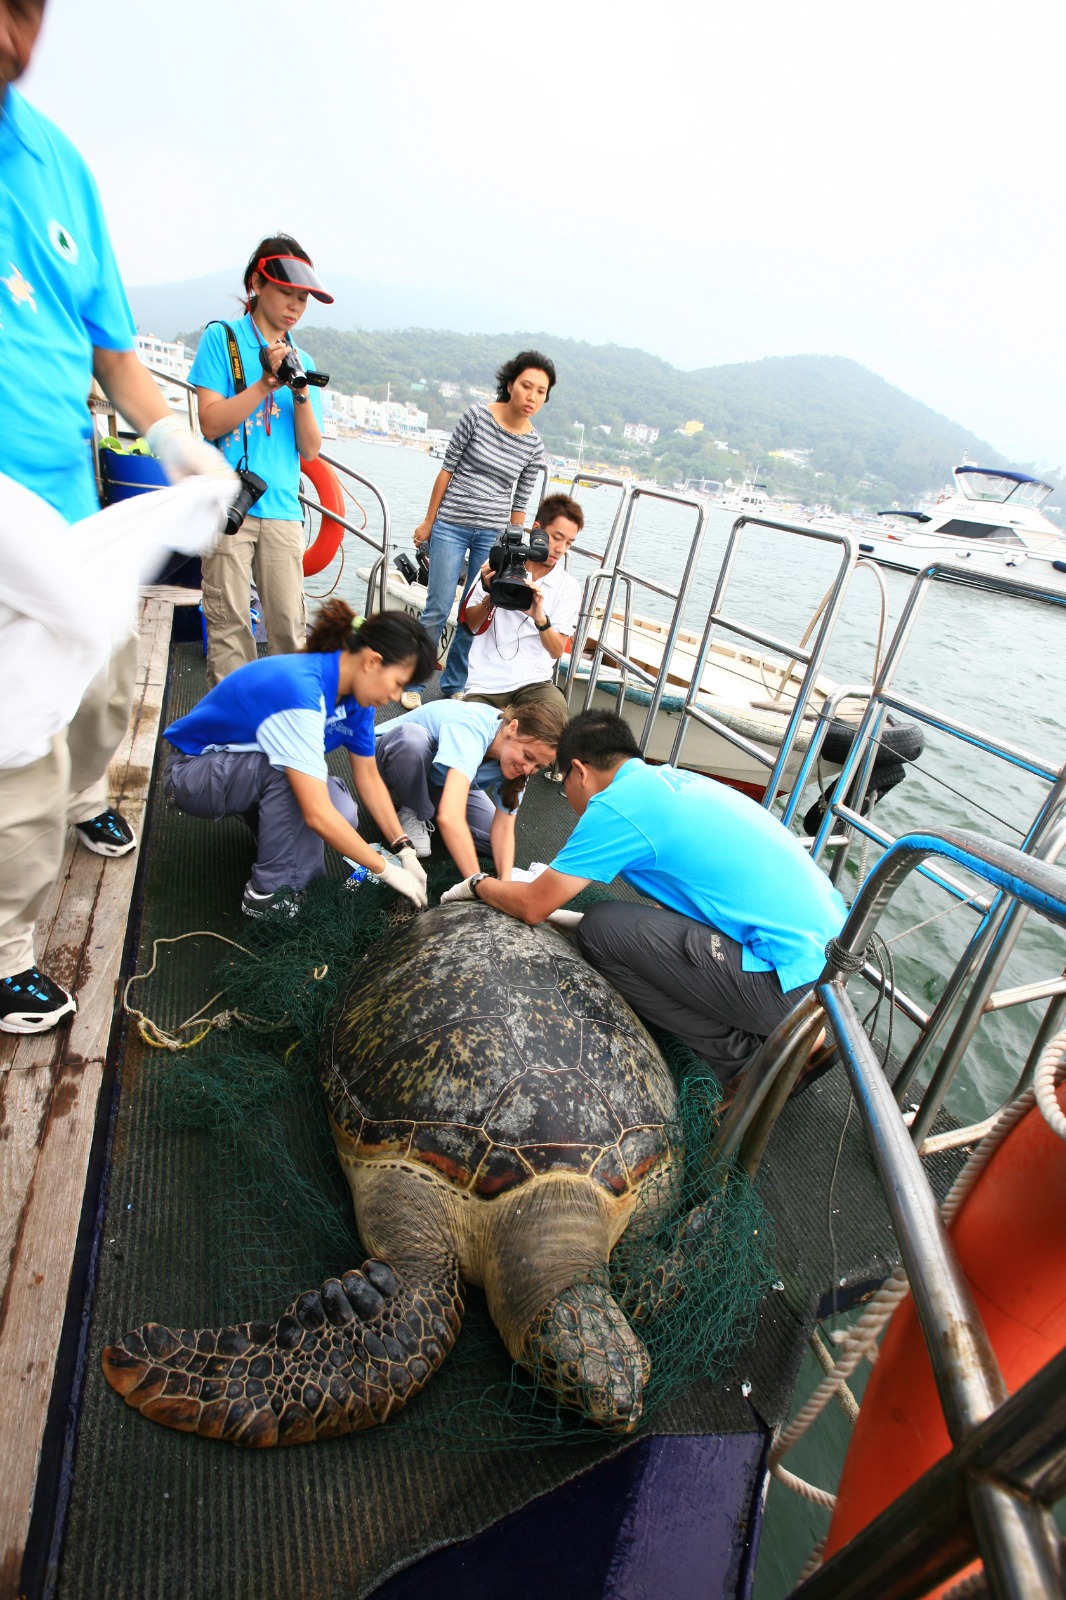 Green Sea Turtle being Tagged within the Hong Kong South Hope Spot - Image by Raymond Man